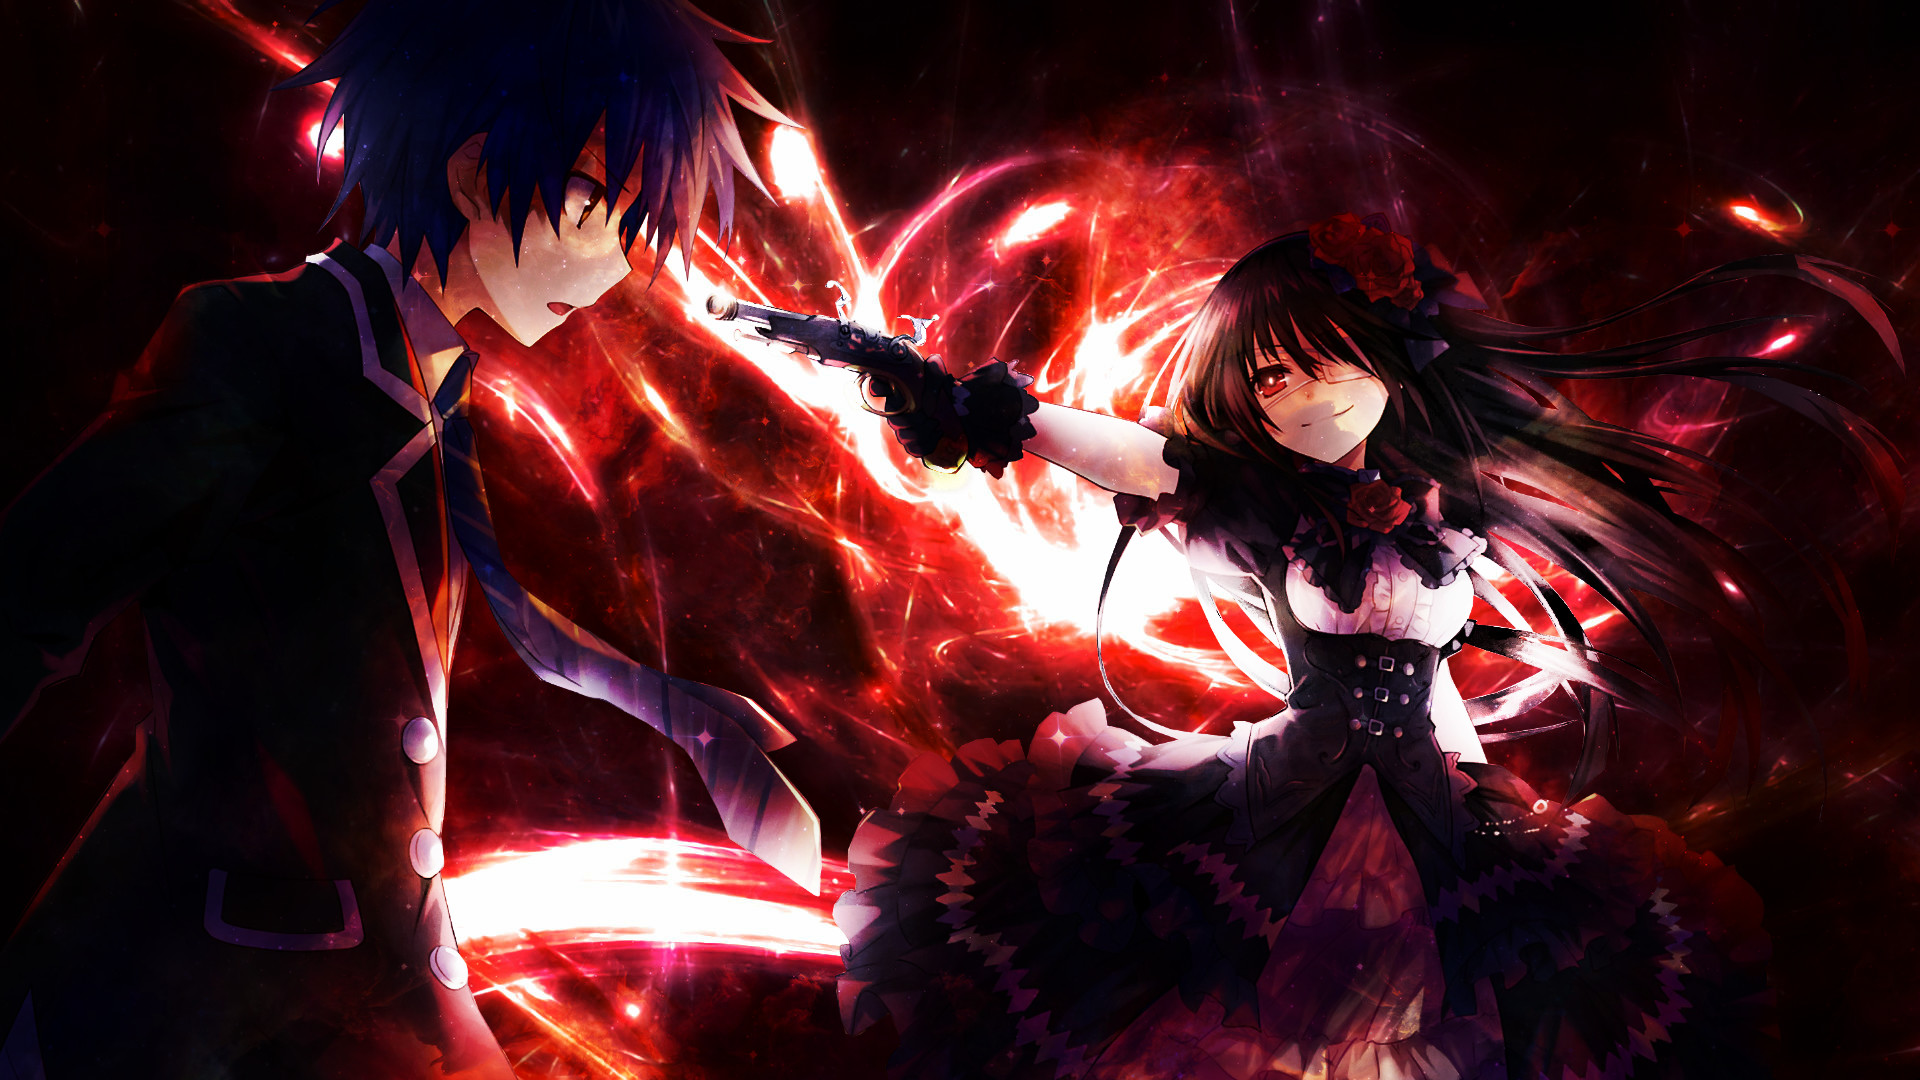 1920x1080 395 Date A Live HD Wallpapers | Backgrounds - Wallpaper Abyss - Page 13